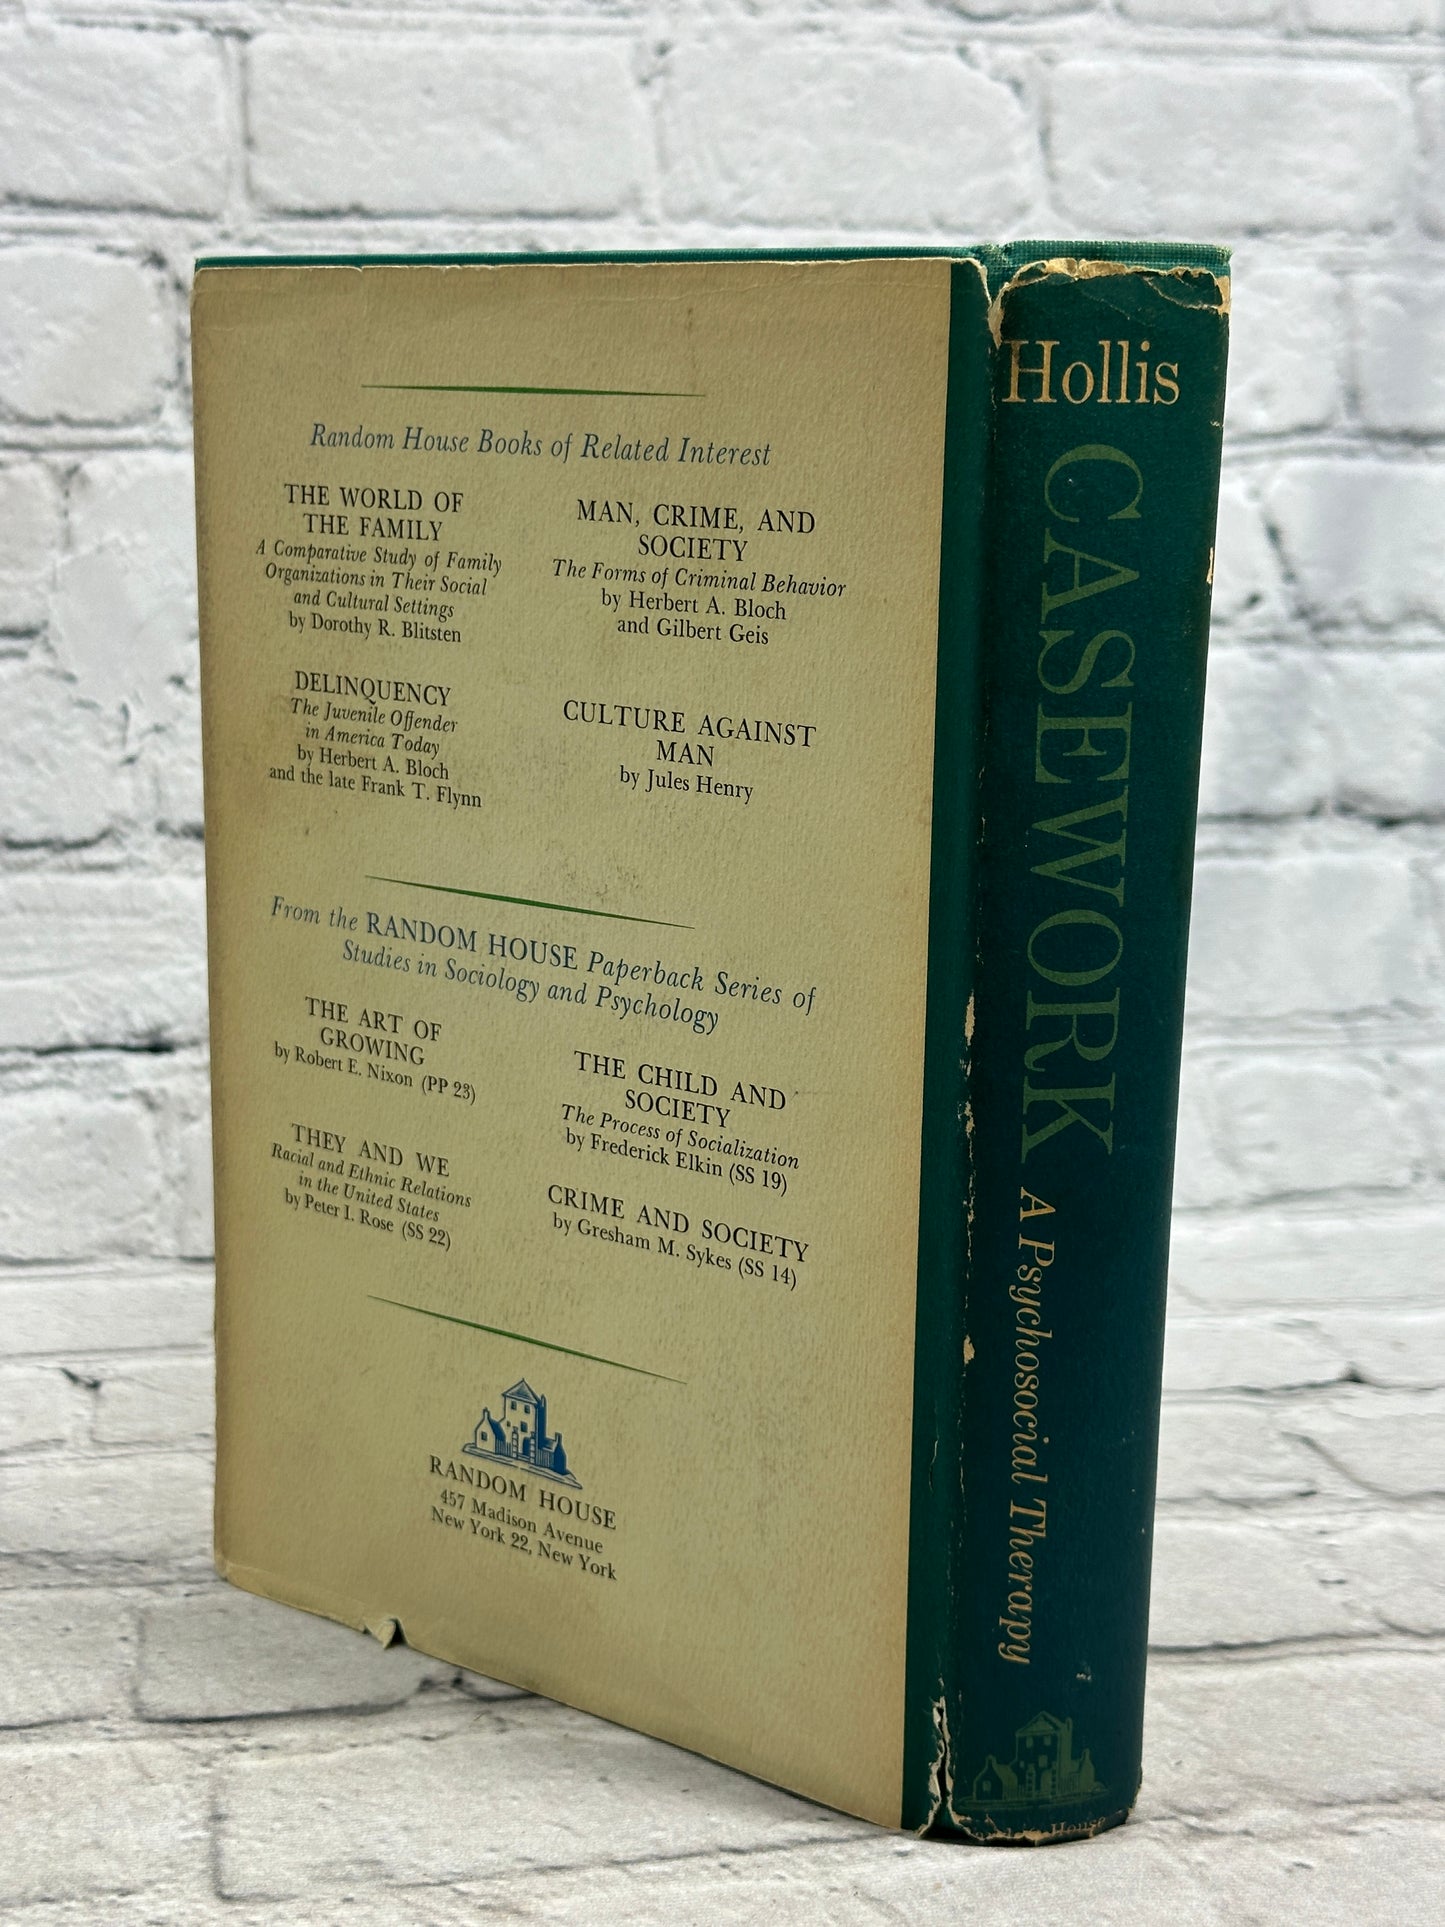 Casework: a Psychosocial Therapy by Florence Hollis [1964 · Second Printing]